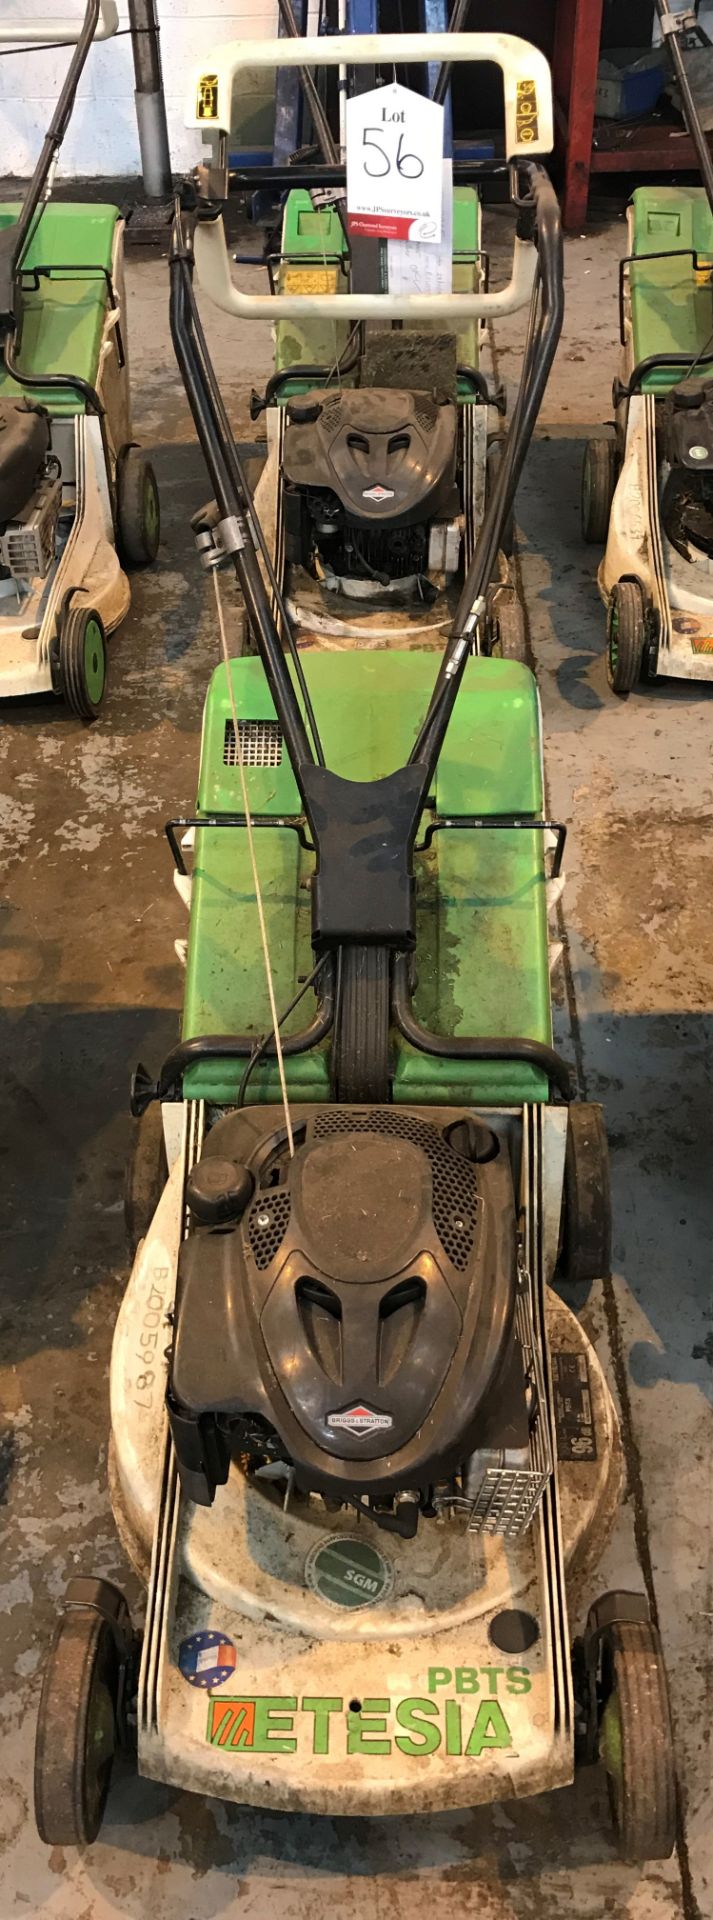 Etesia PBTS Self Propelled Commercial Lawn Mower | 2013